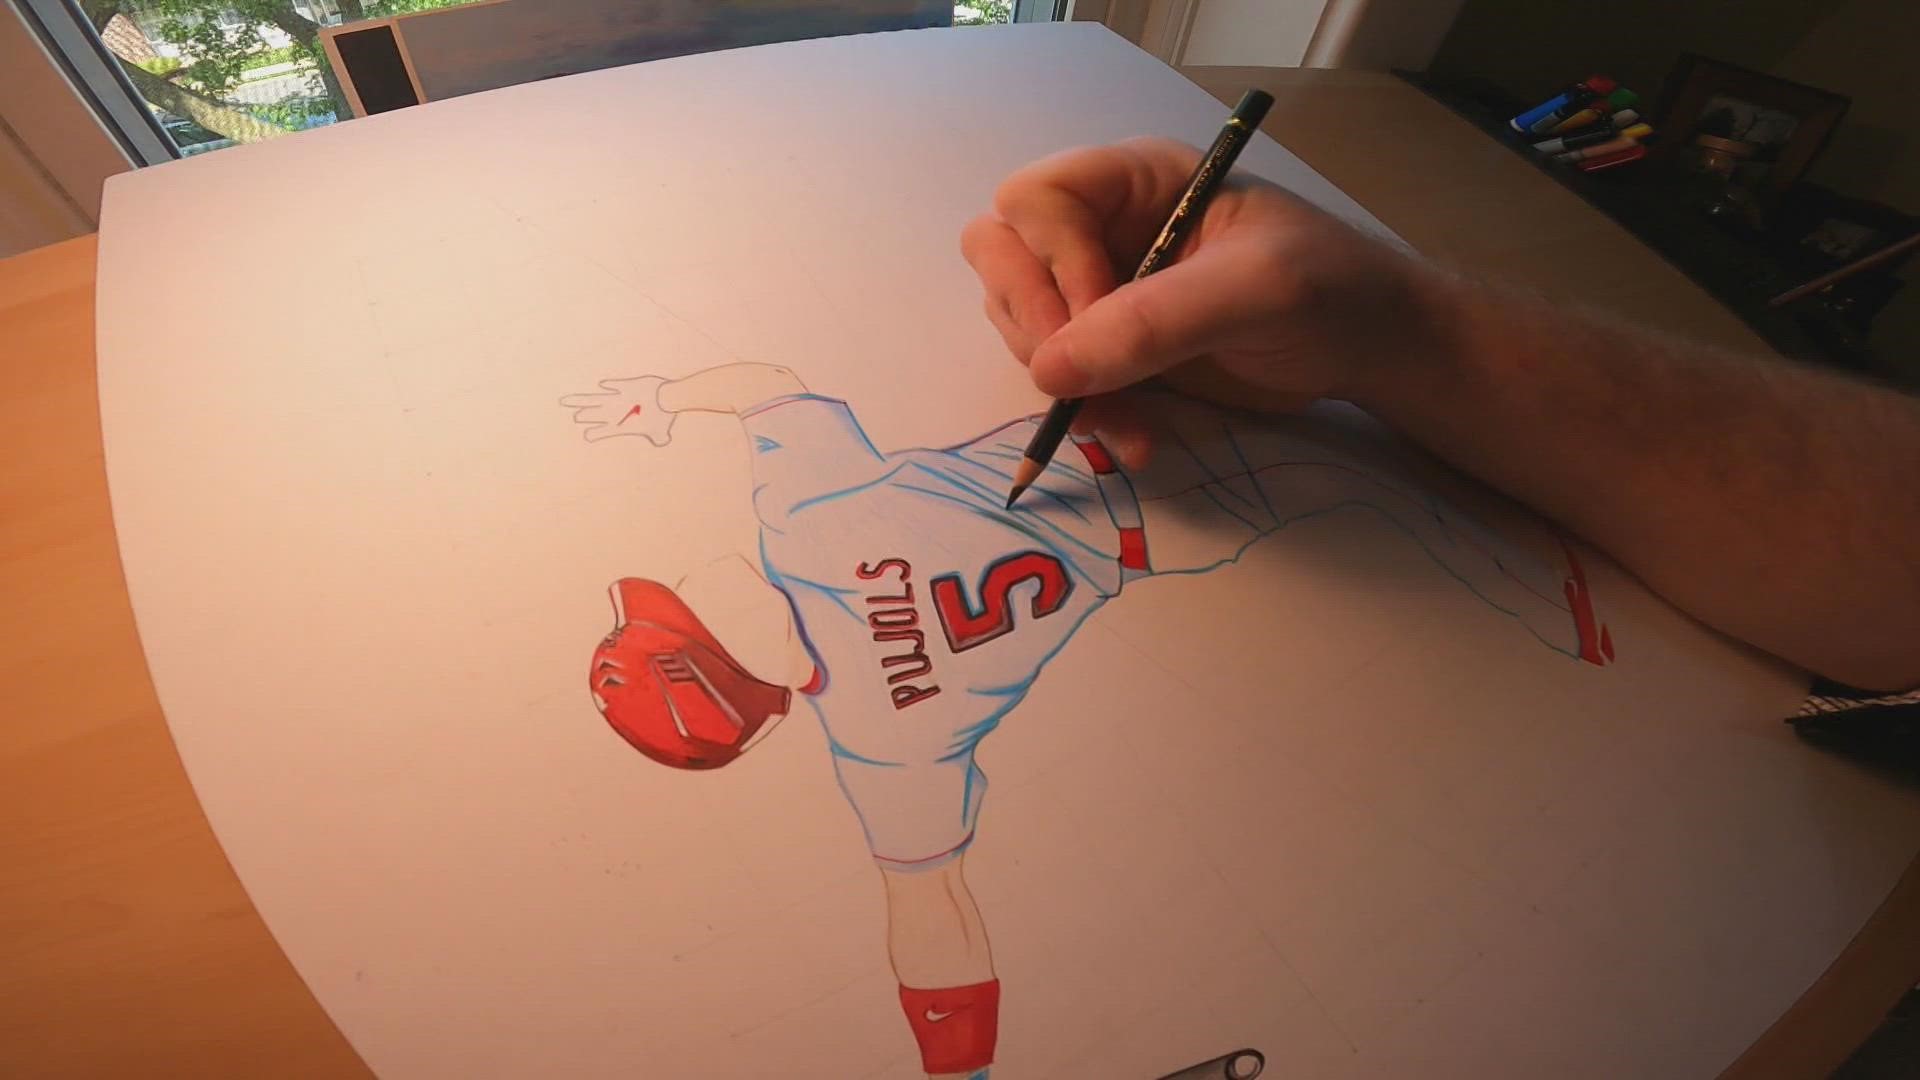 In St. Louis, people love their sports teams. One local chef shows his admiration for the Red Birds via his art.